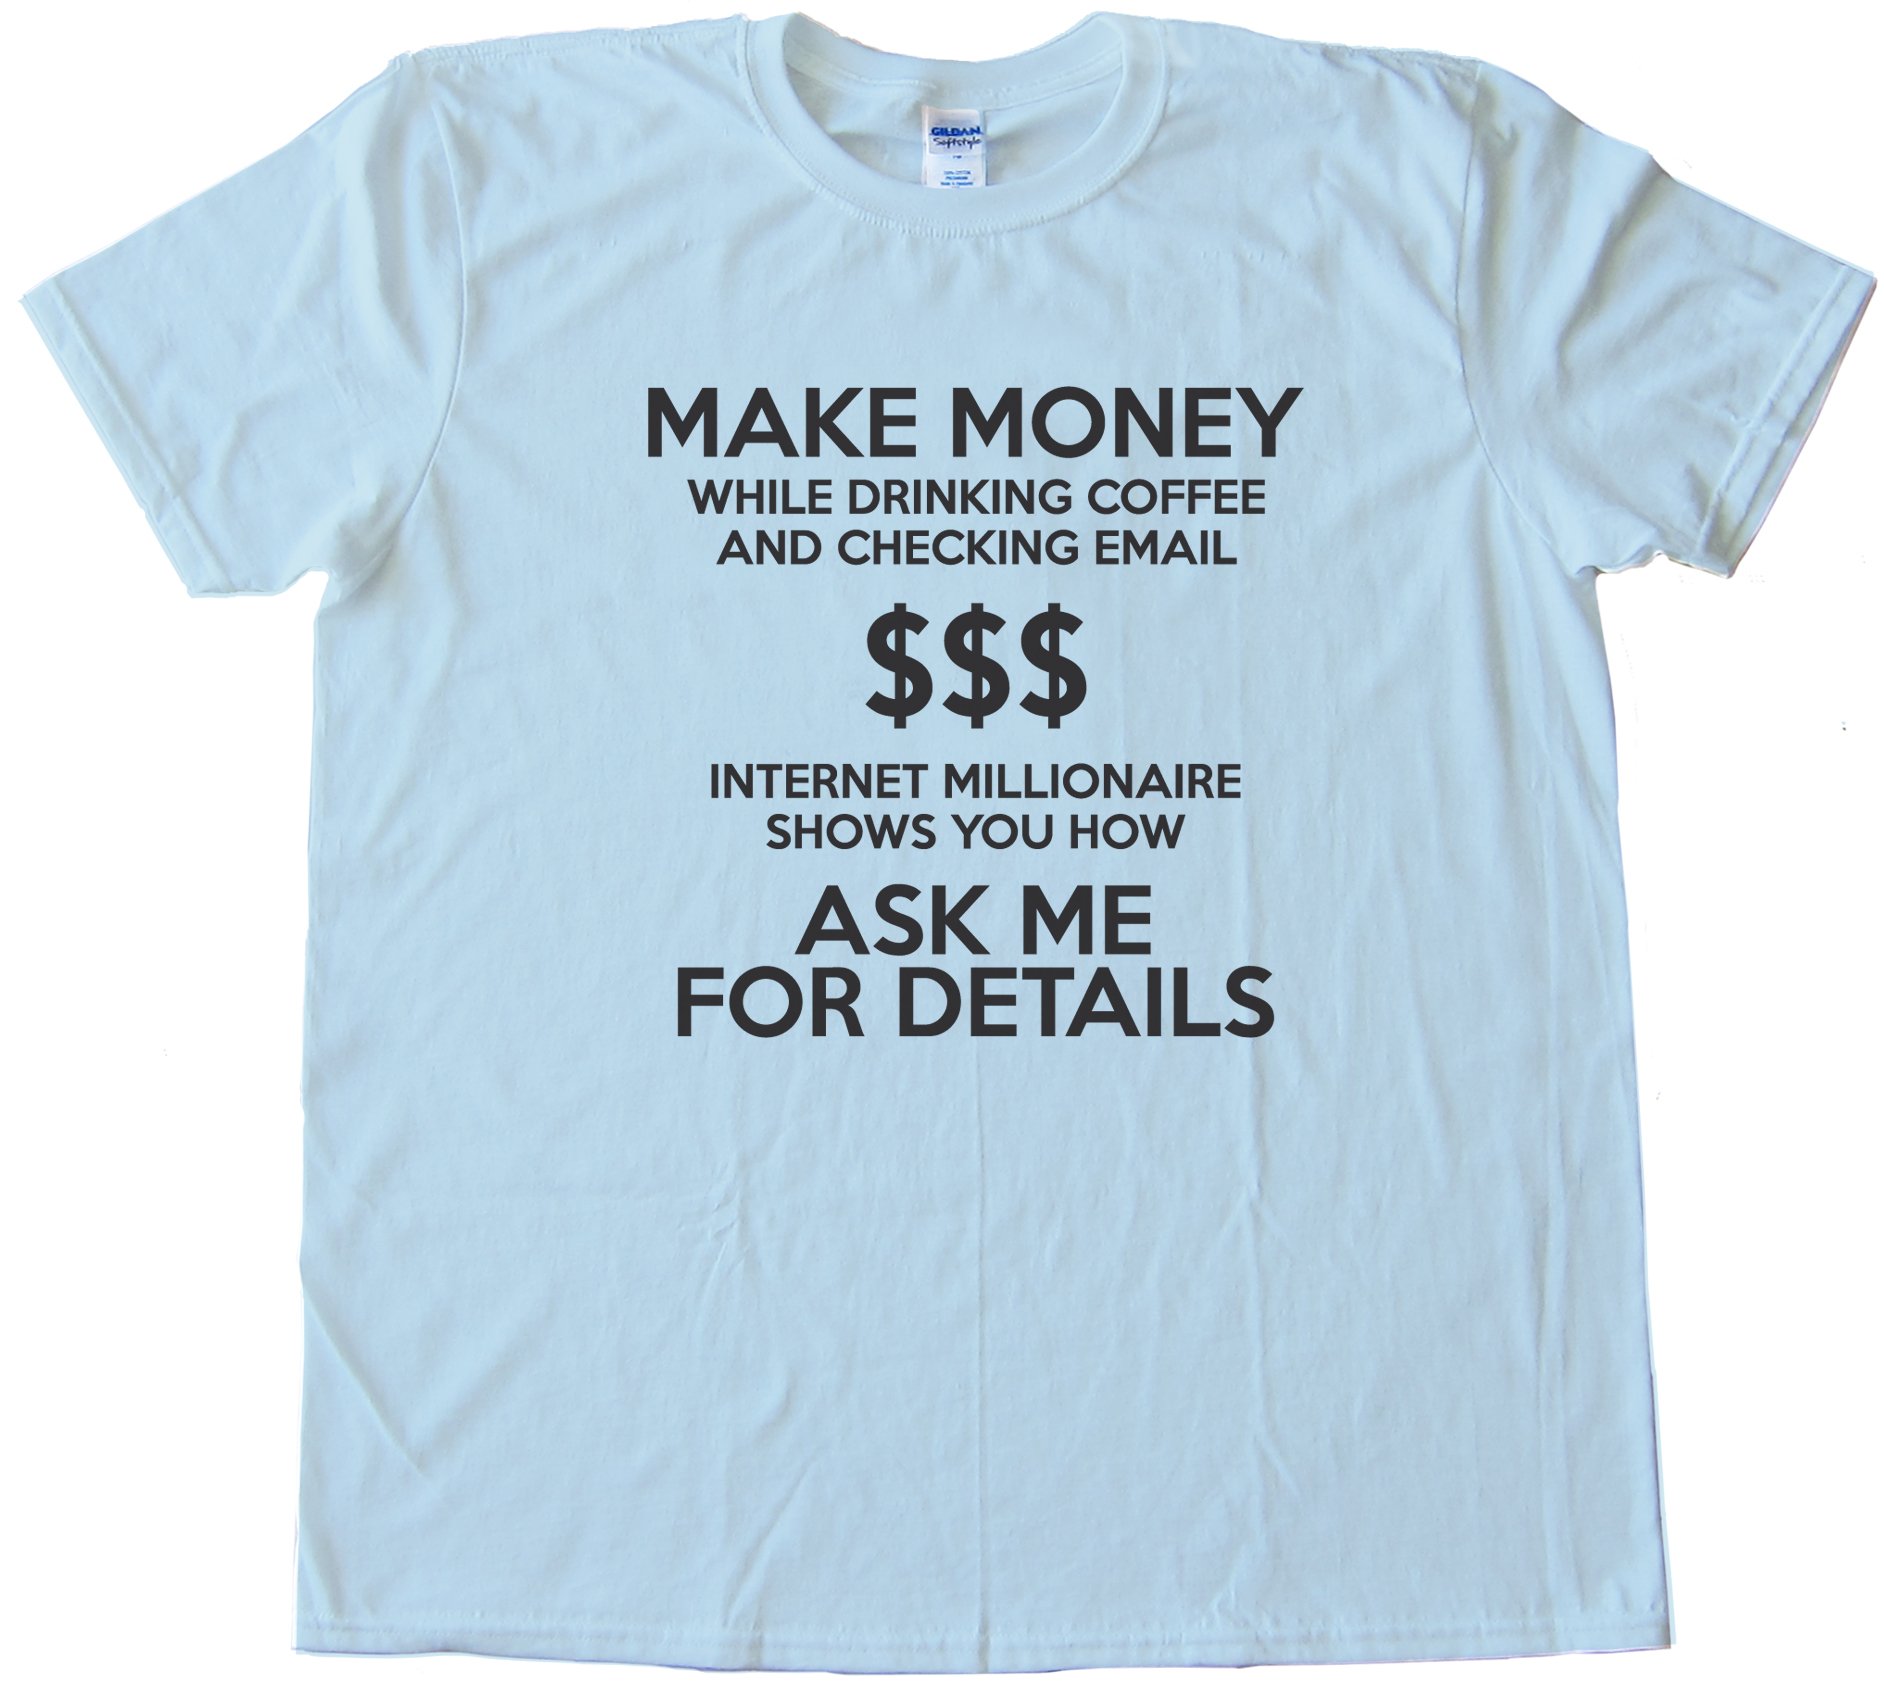 Make Money While Drinking Coffee And Checking Email Tee Shirt